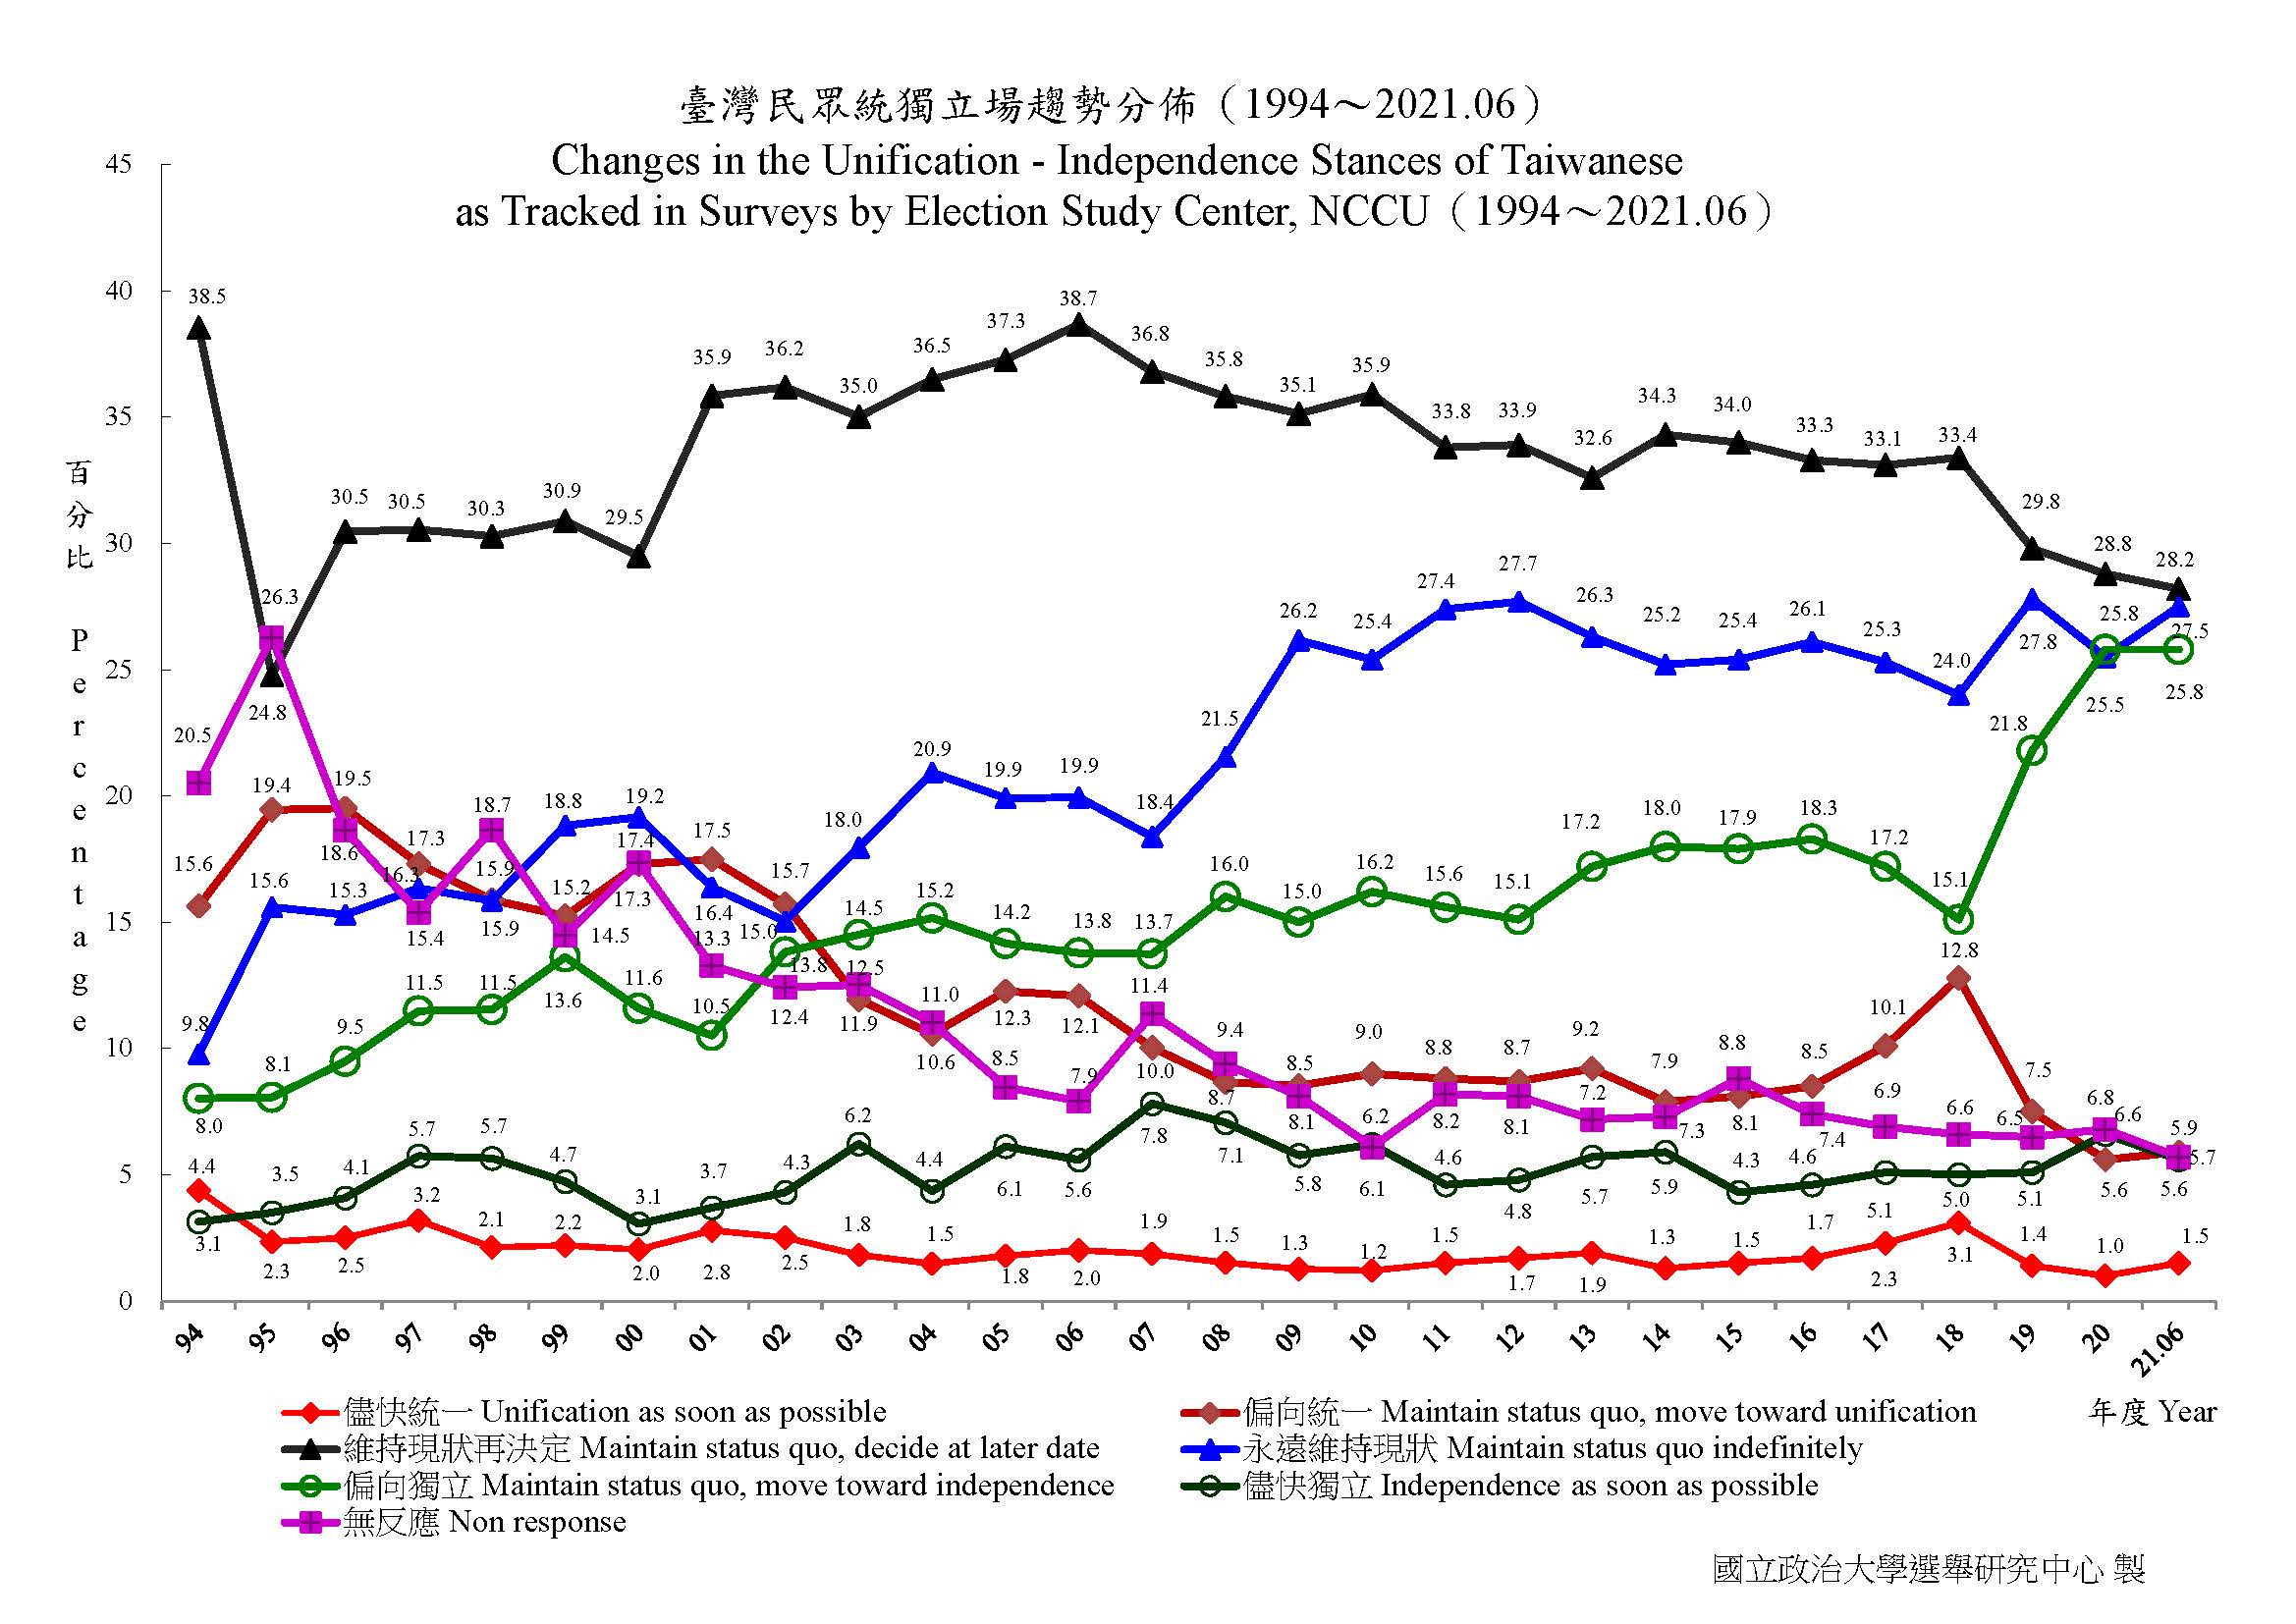 A graph with lines showing a shift in attitudes towards independence and unification over time.